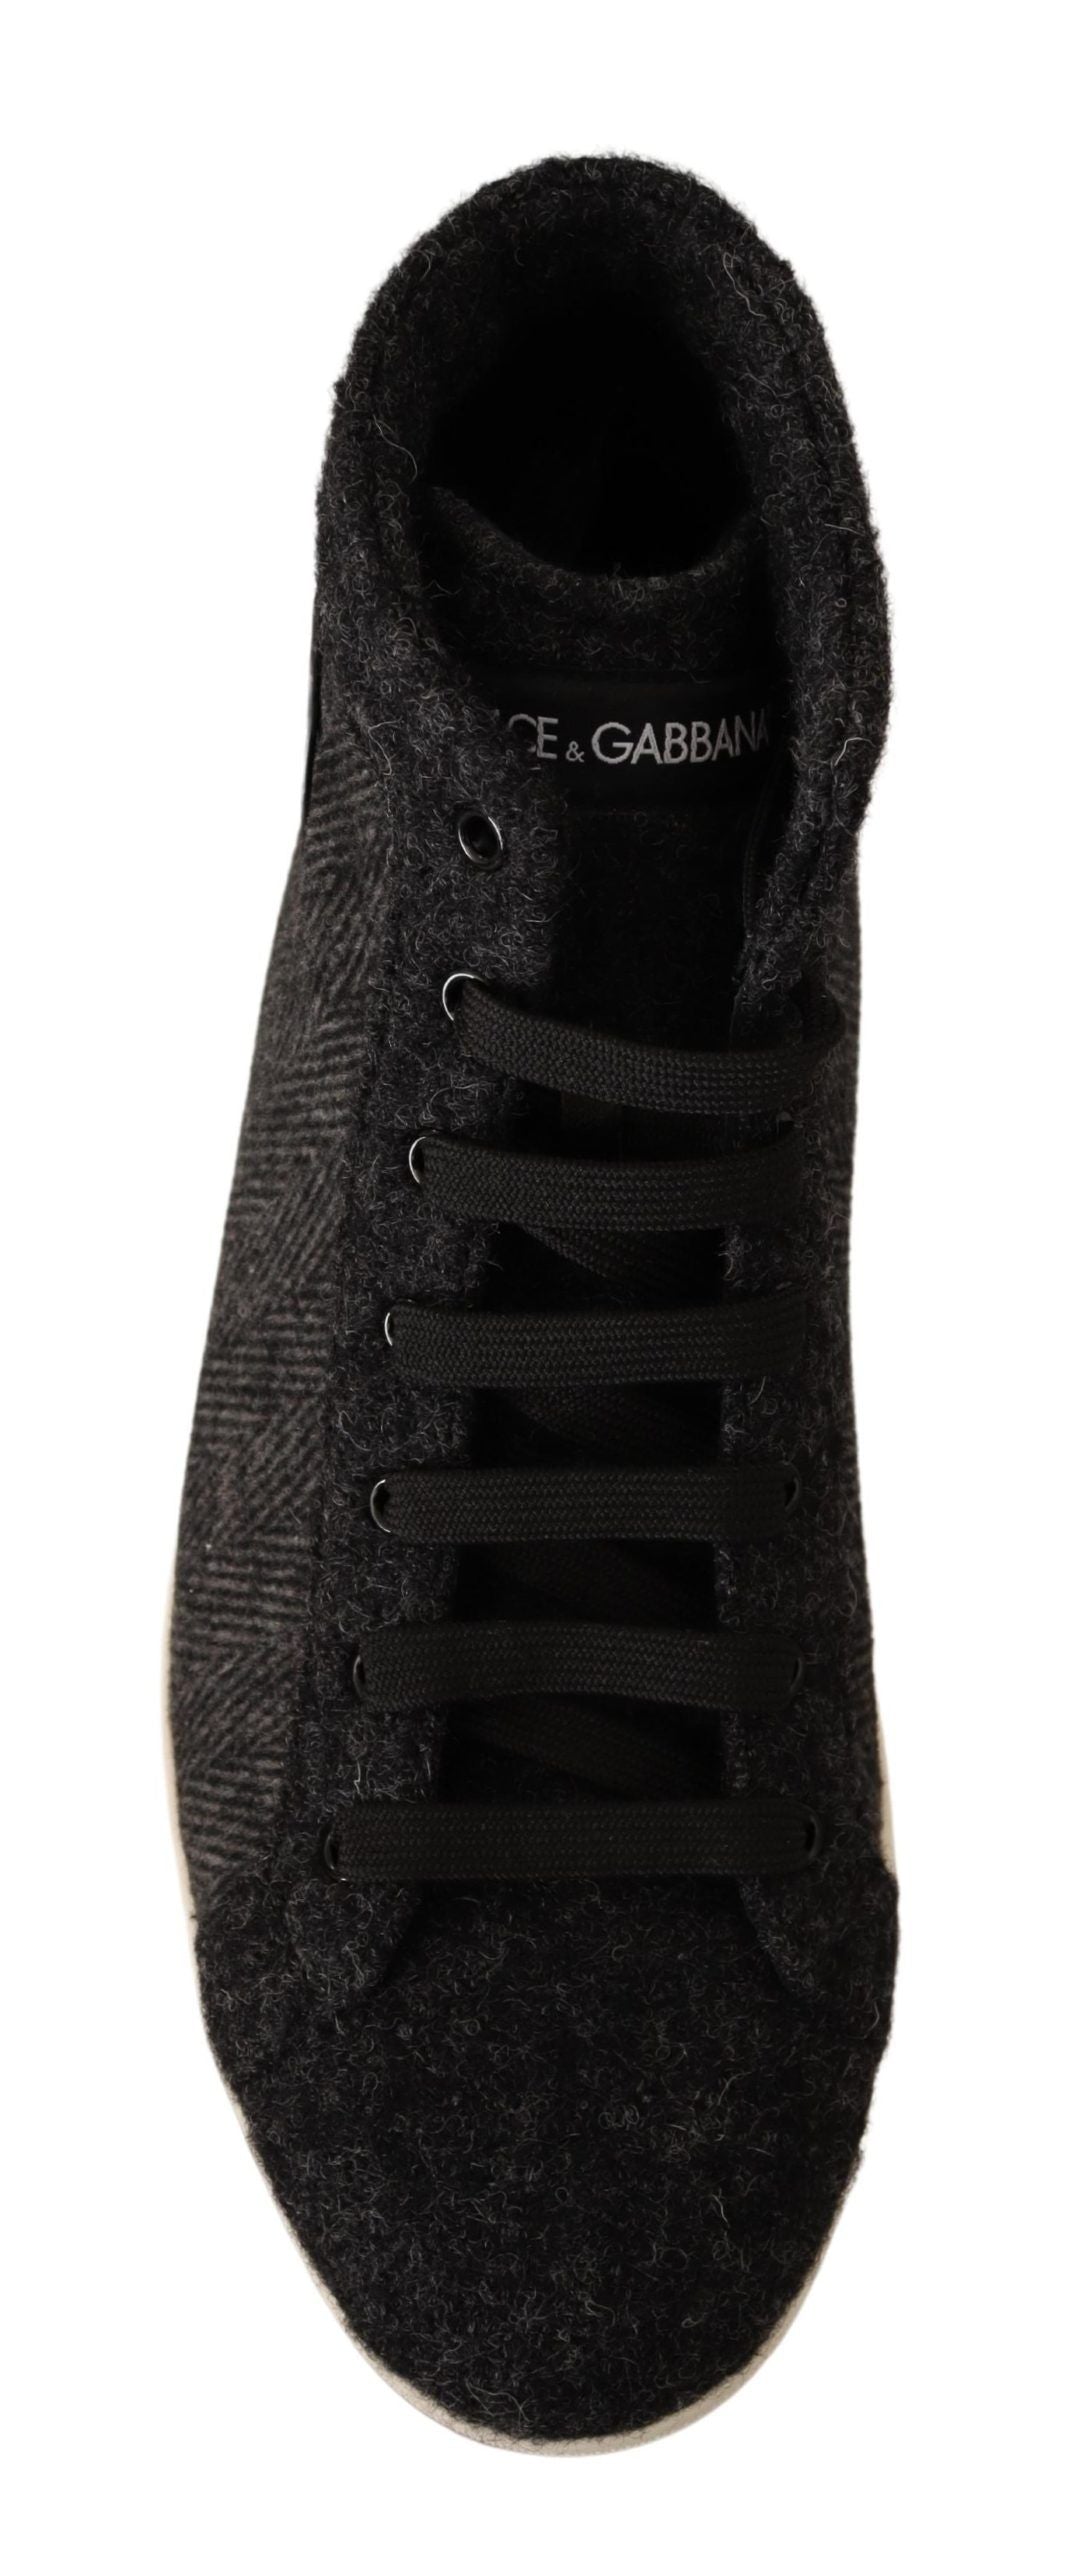 Dolce & Gabbana Grey Wolle Baumwolle Casual High Top Sneakers